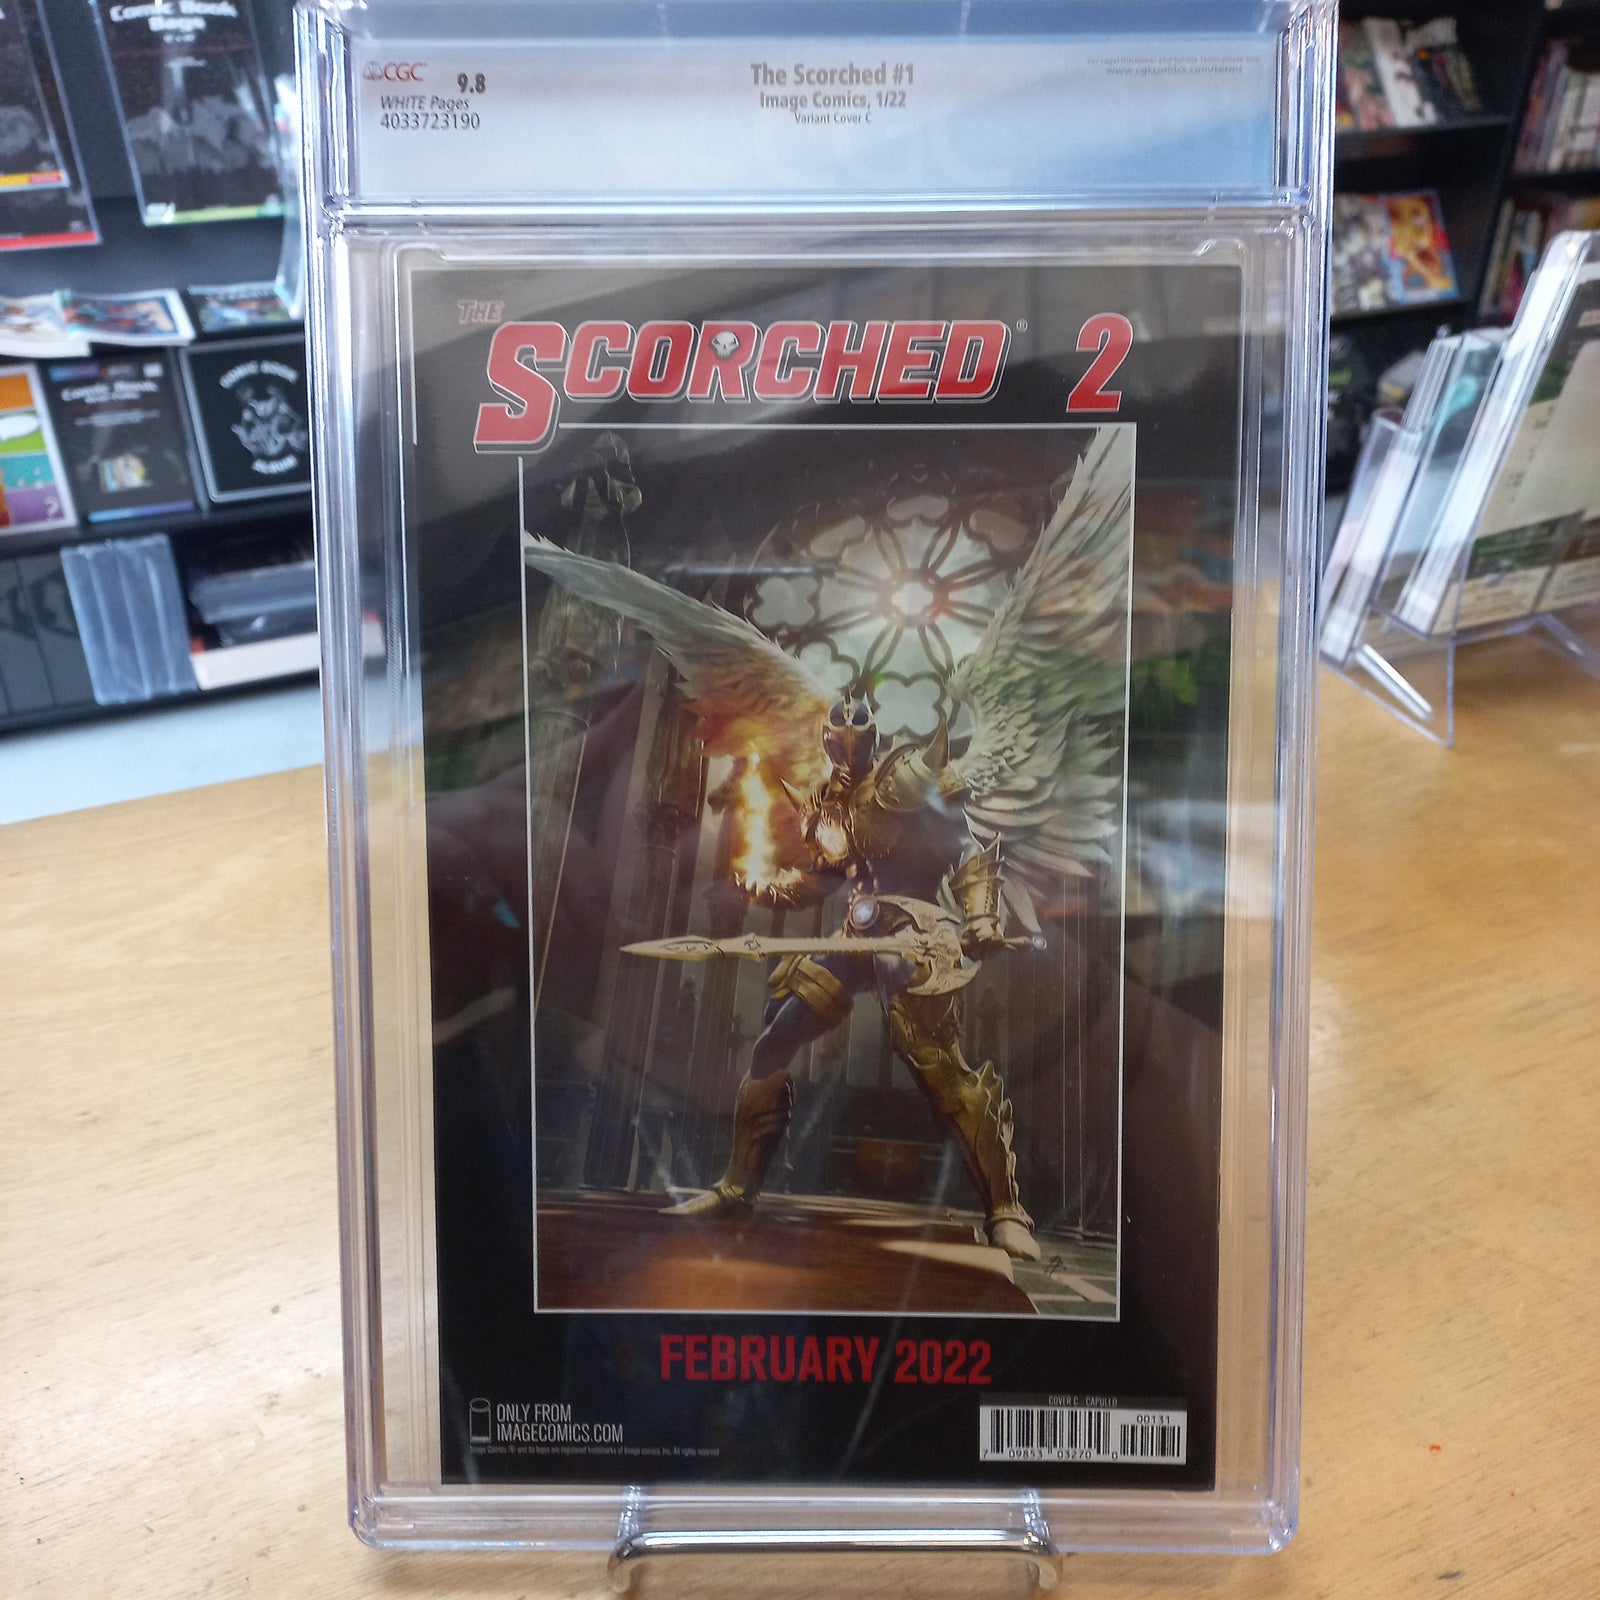 THE SCORCHED #1 CGC GRADED (9.8)